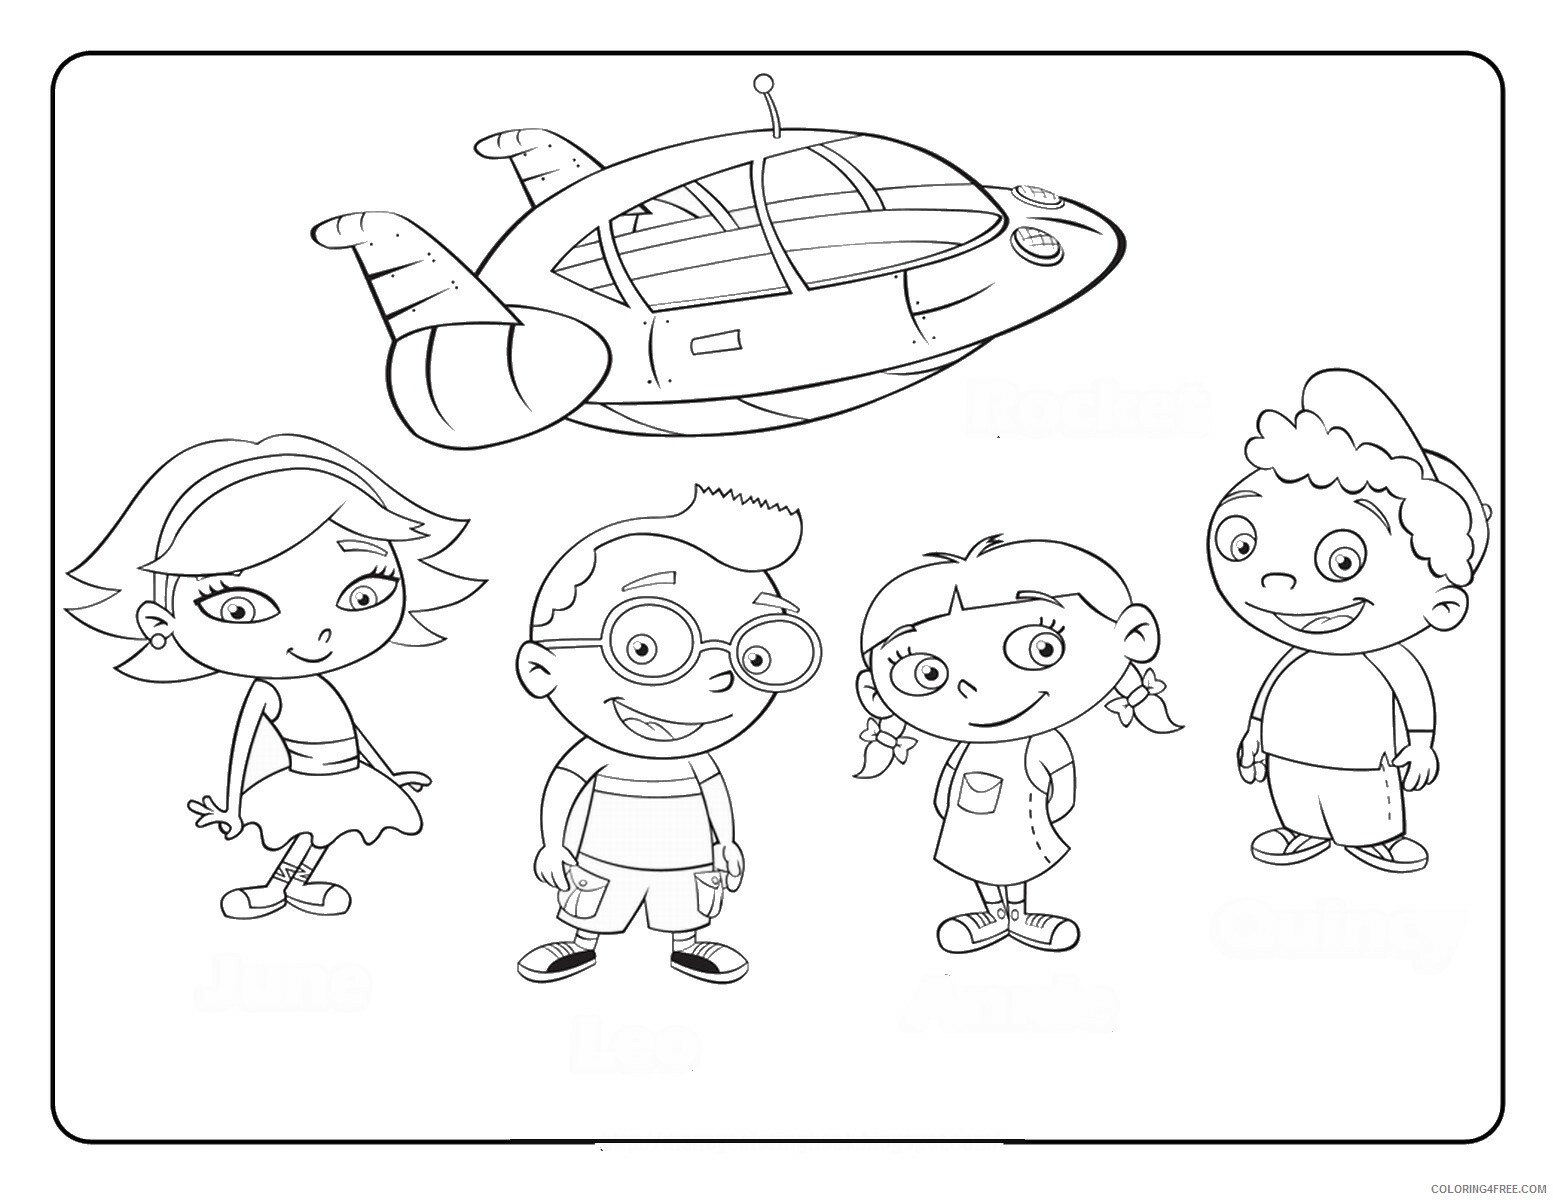 Little Einsteins Coloring Pages TV Film little_einsteins_09 Printable 2020 04473 Coloring4free